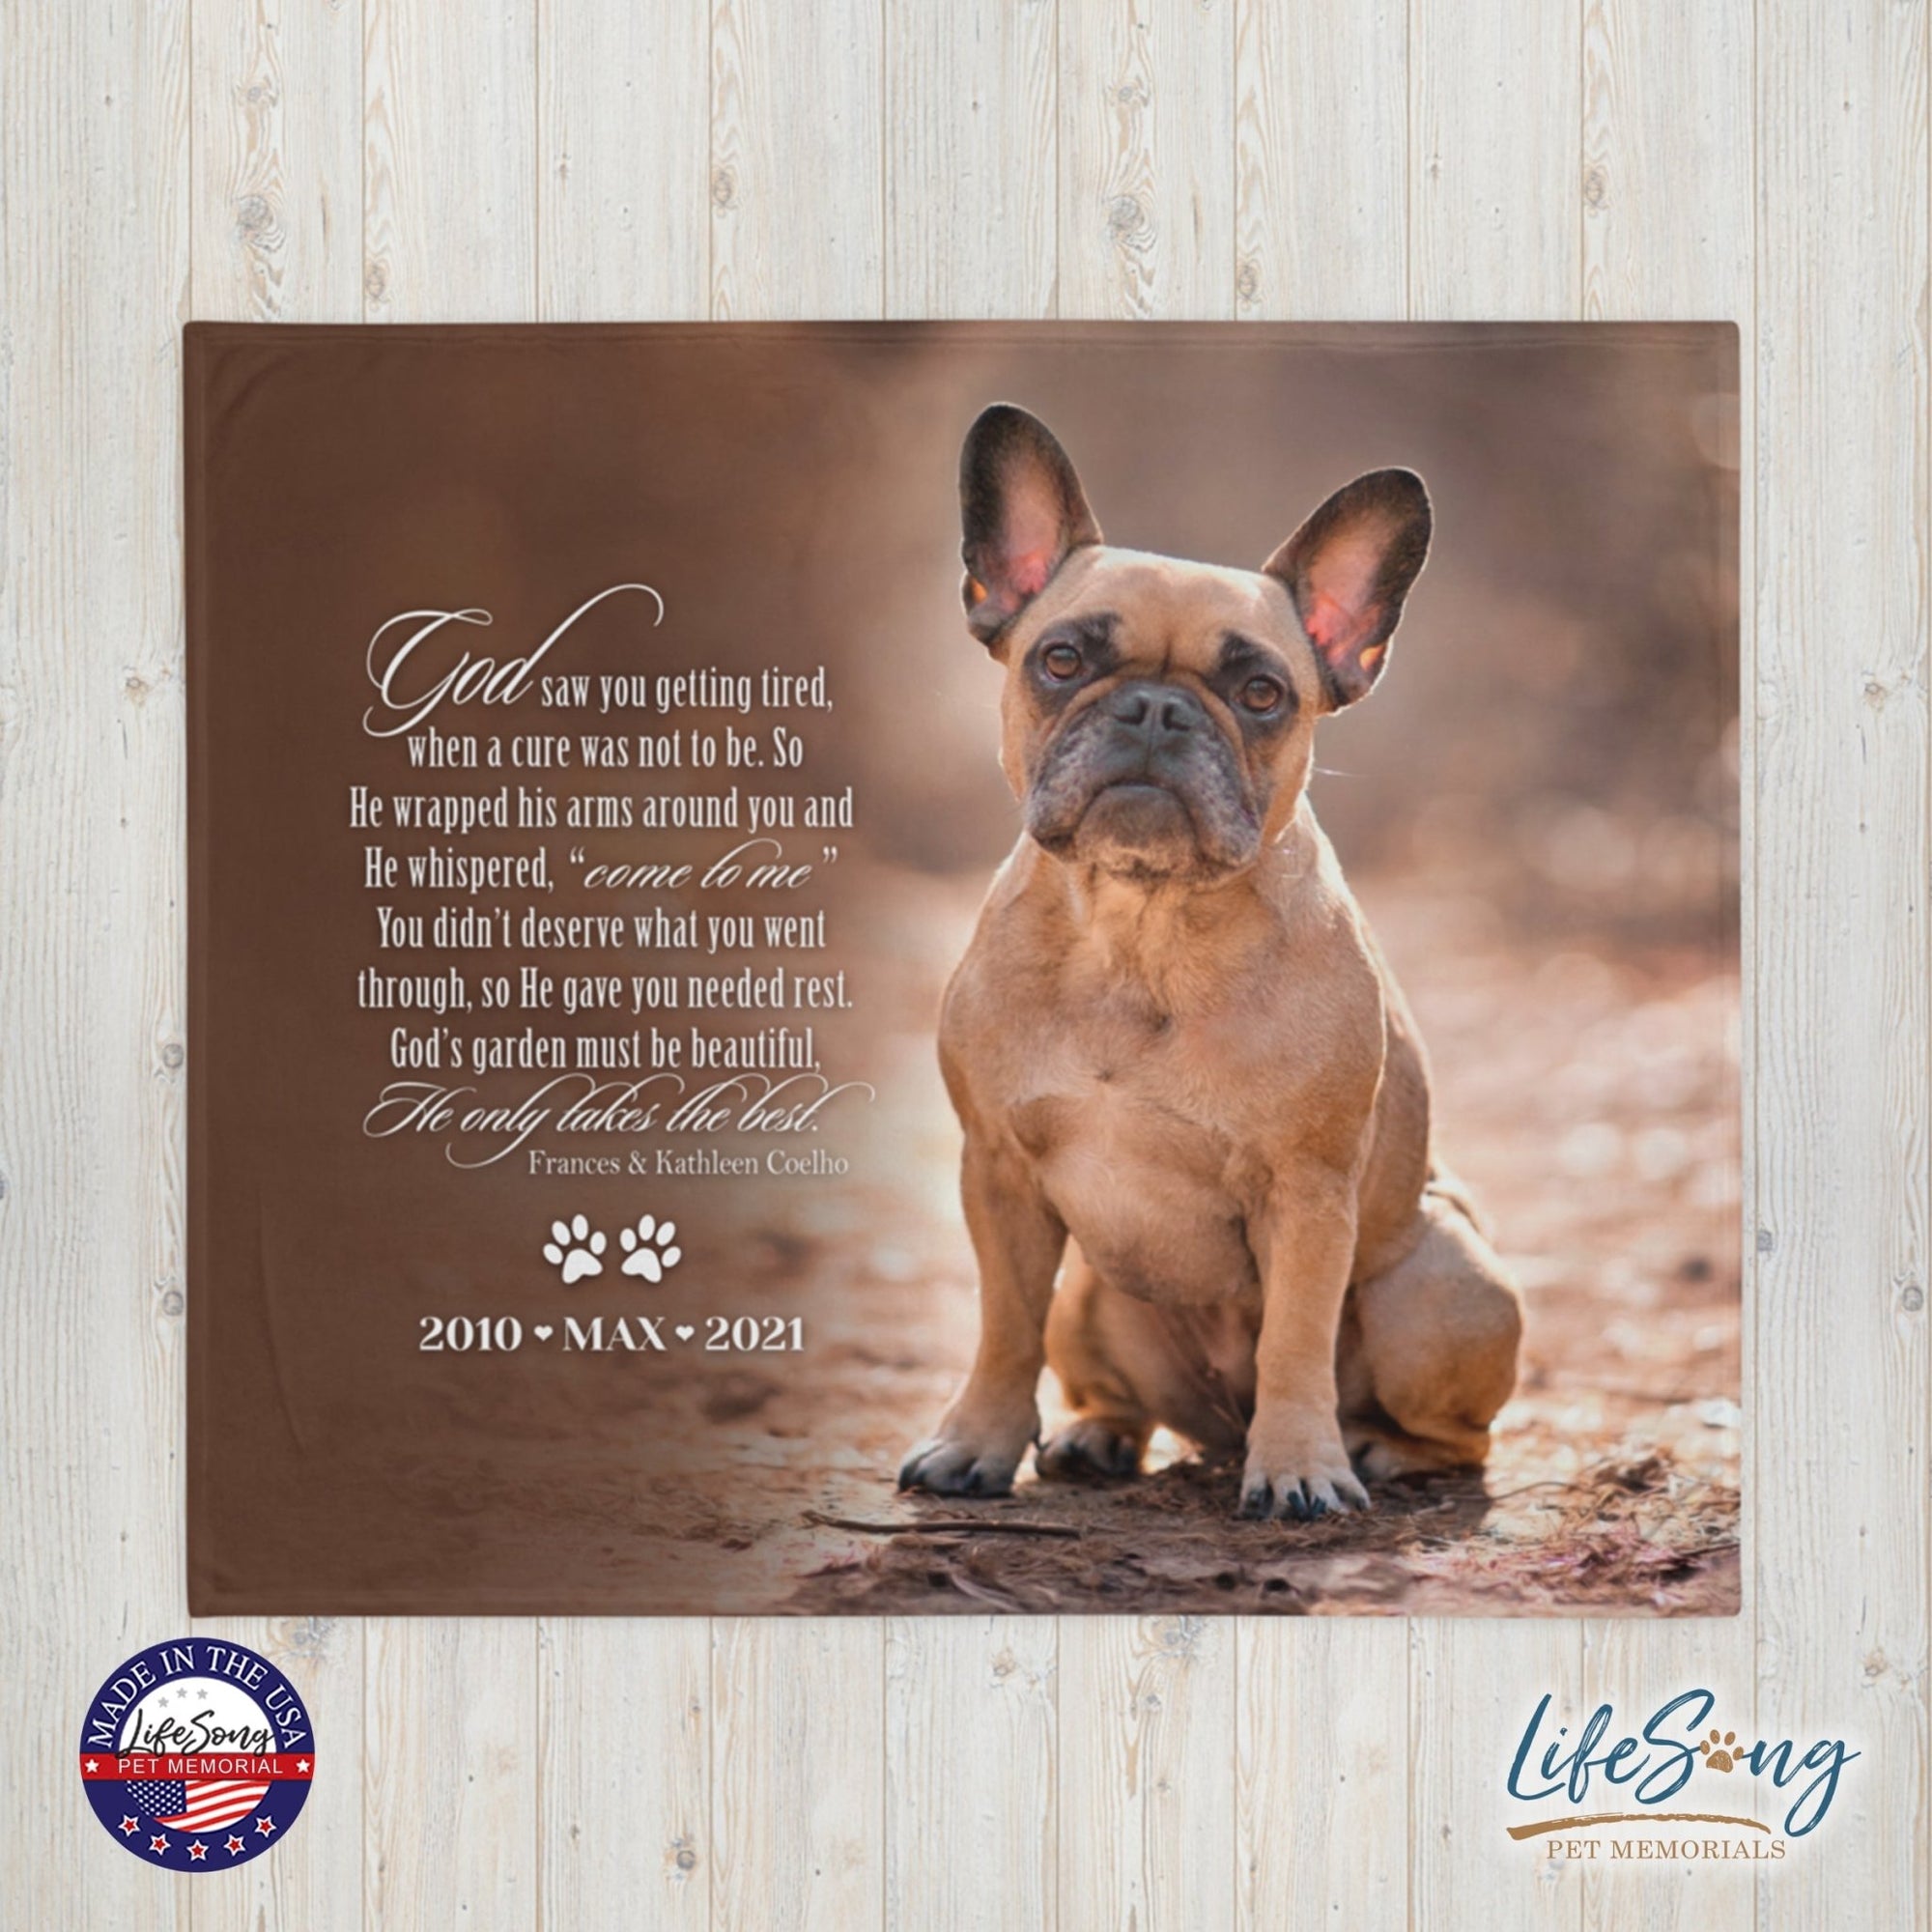 Personalized Pet Memorial Printed Throw Blanket - God Saw You Getting Tired - LifeSong Milestones